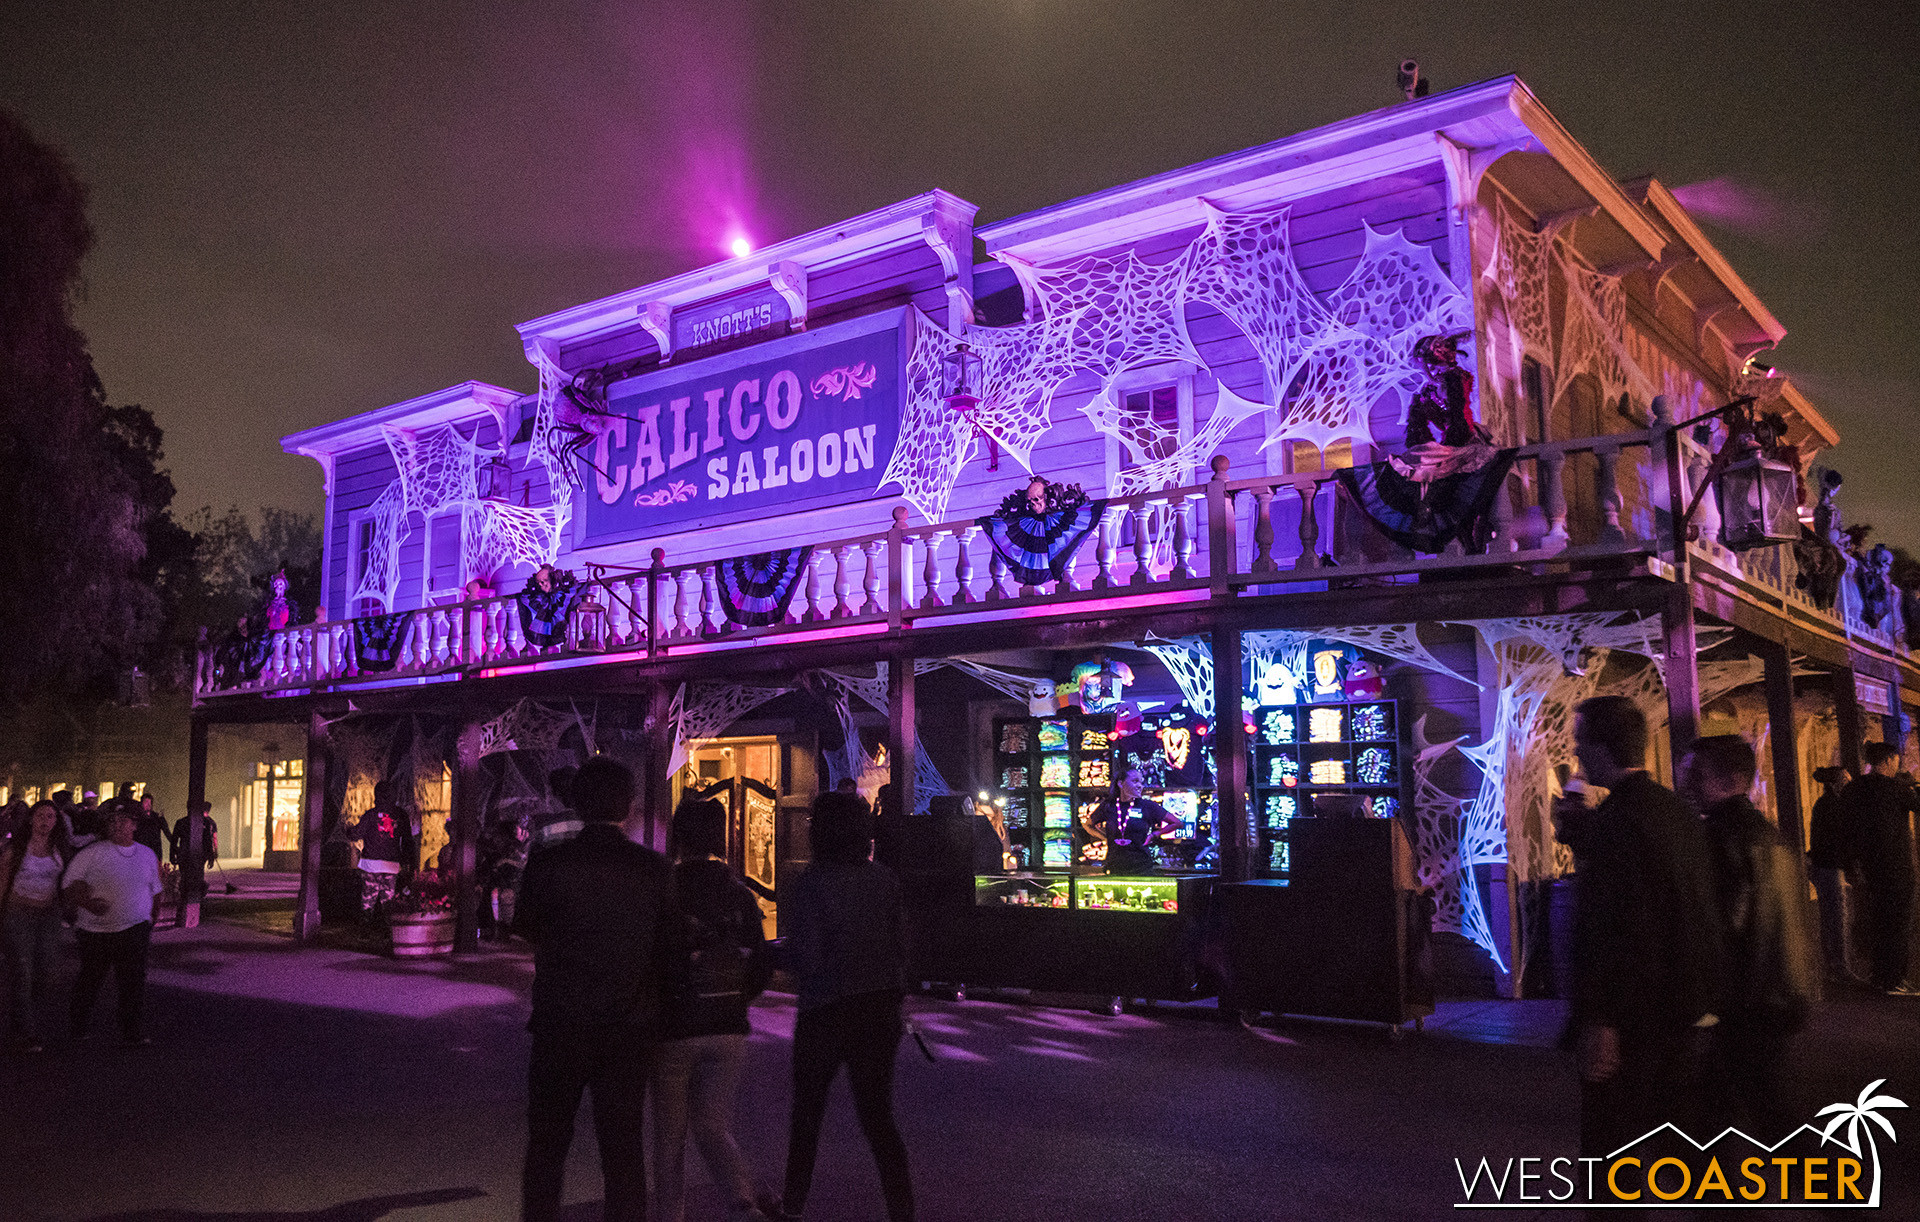  The Calico Saloon gets ghosts guests too. 